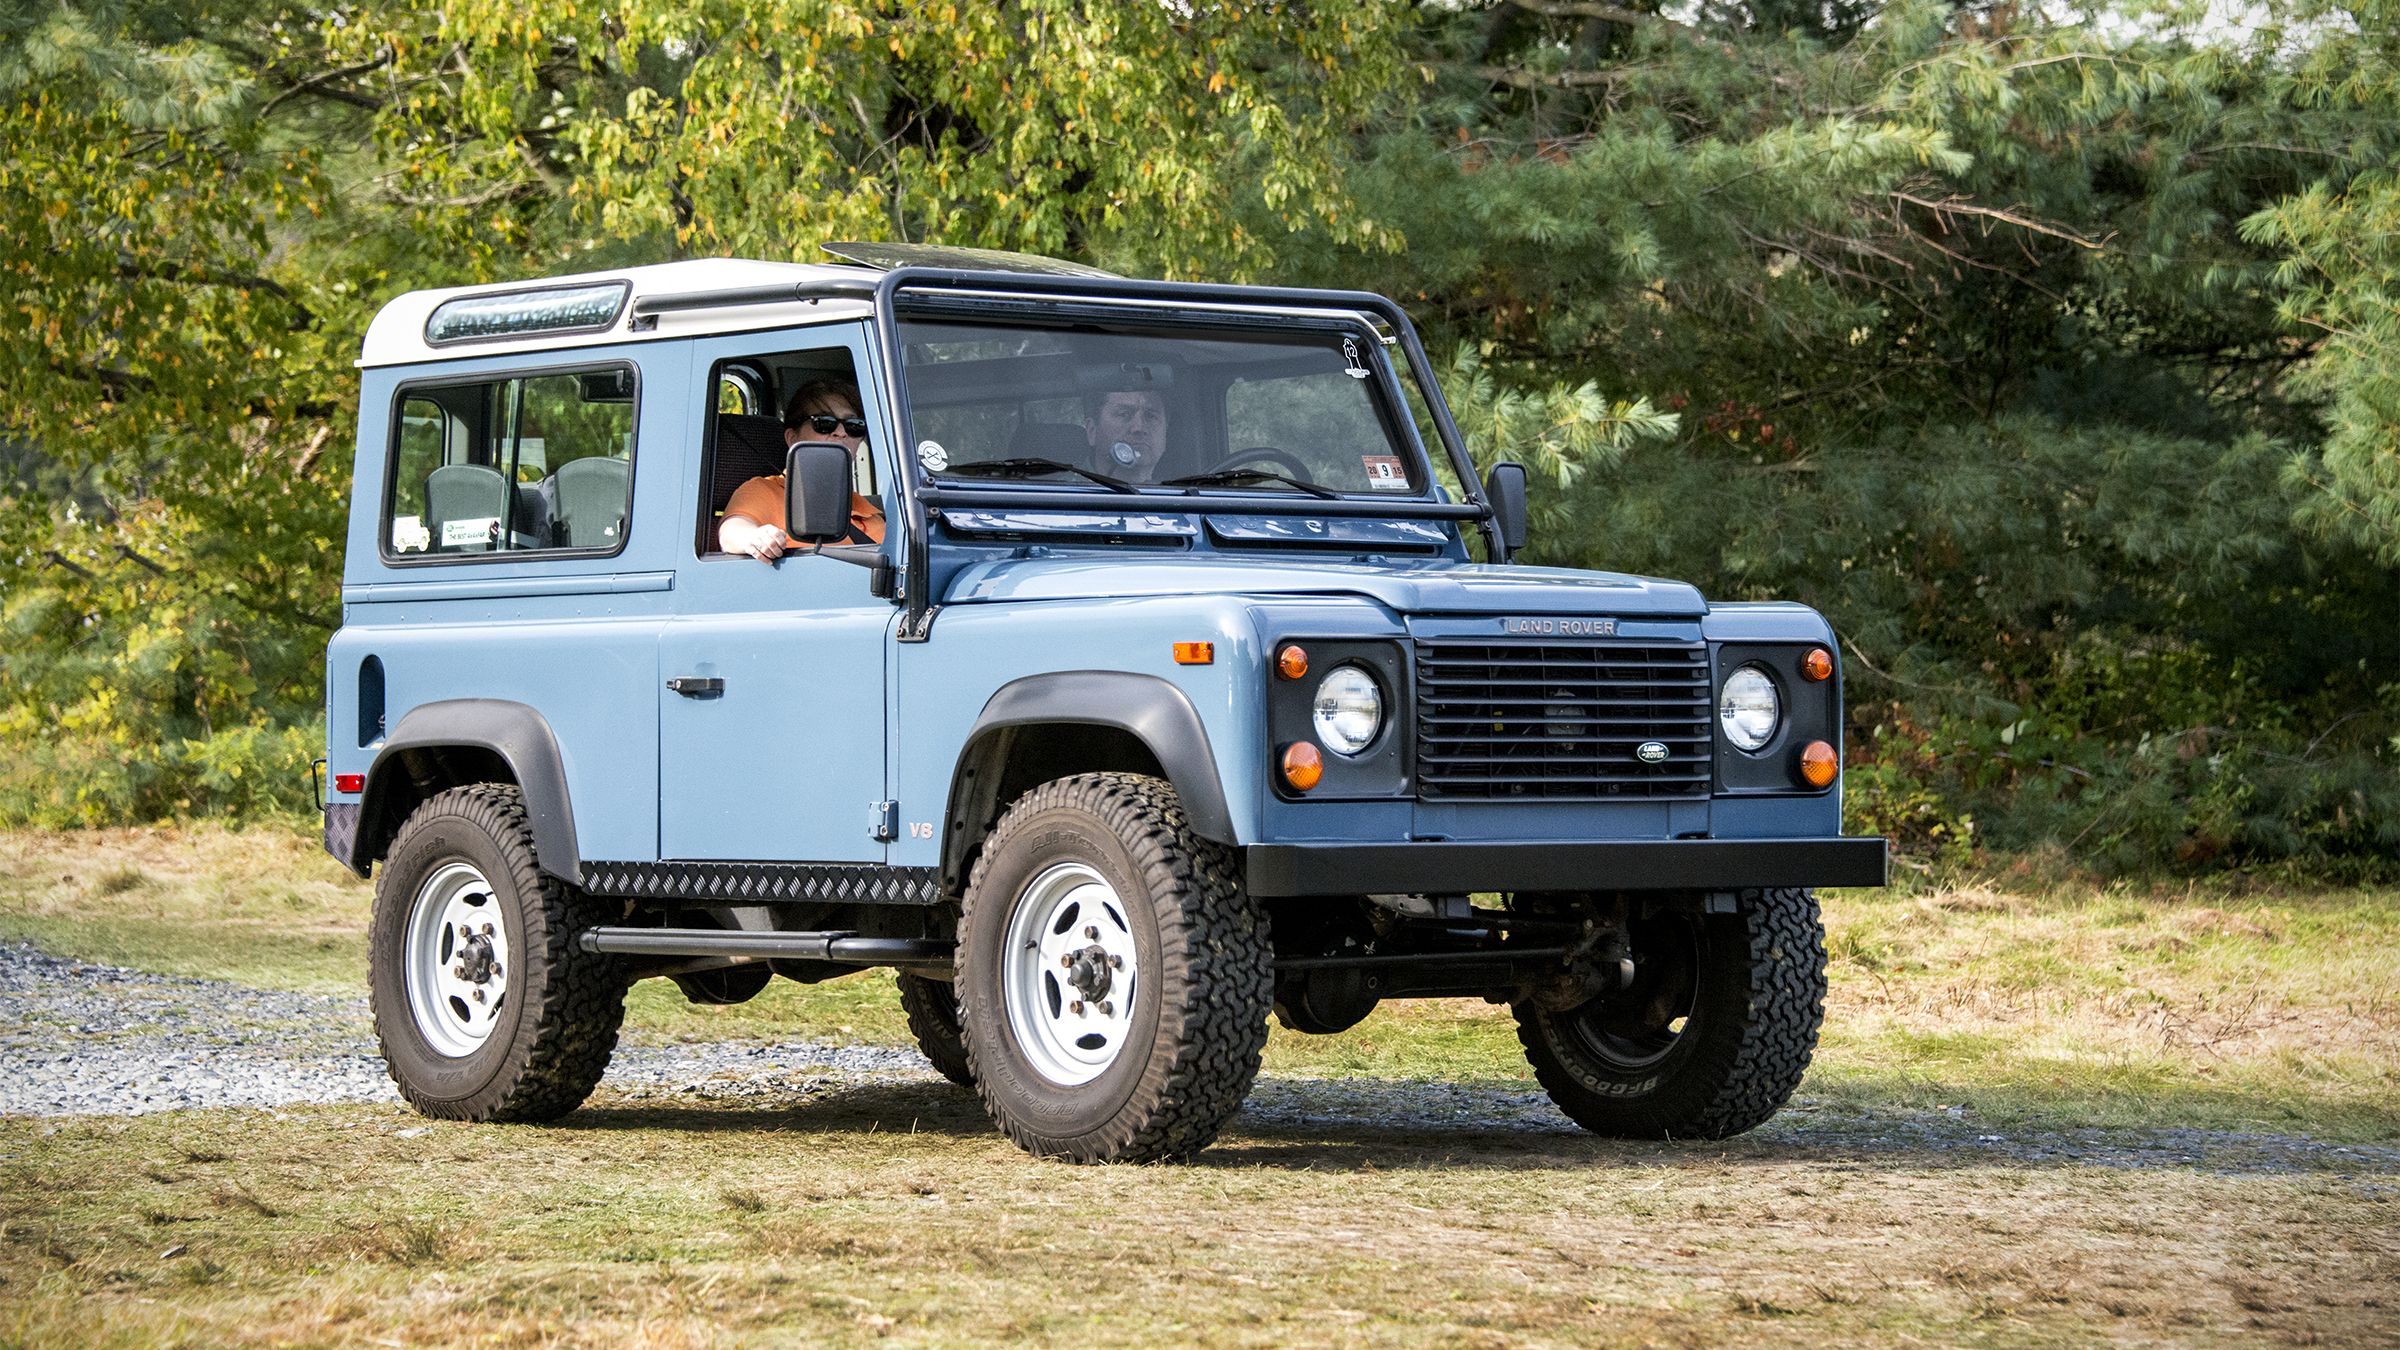 Land Rover Loses Defender Trademark Suit to Ineos